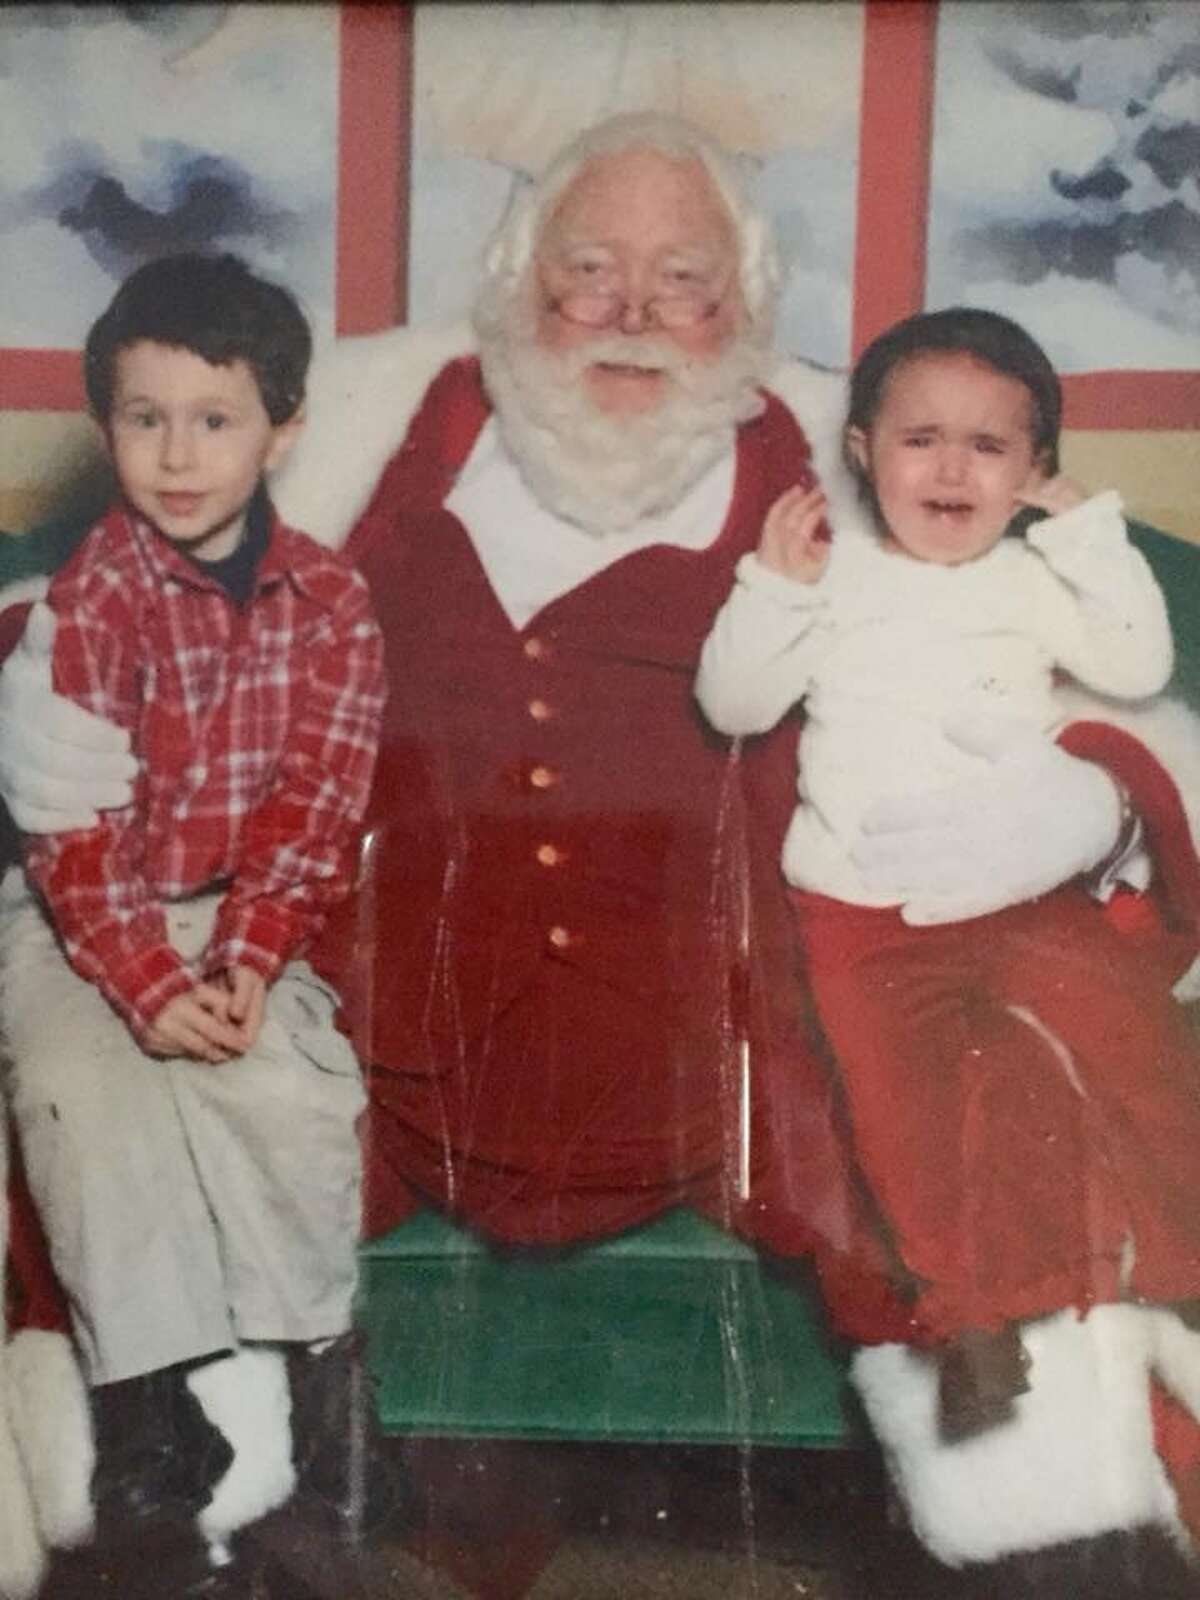 Daniel (left) and Emma (right) met Santa Claus 10 years ago in this memorable photo.